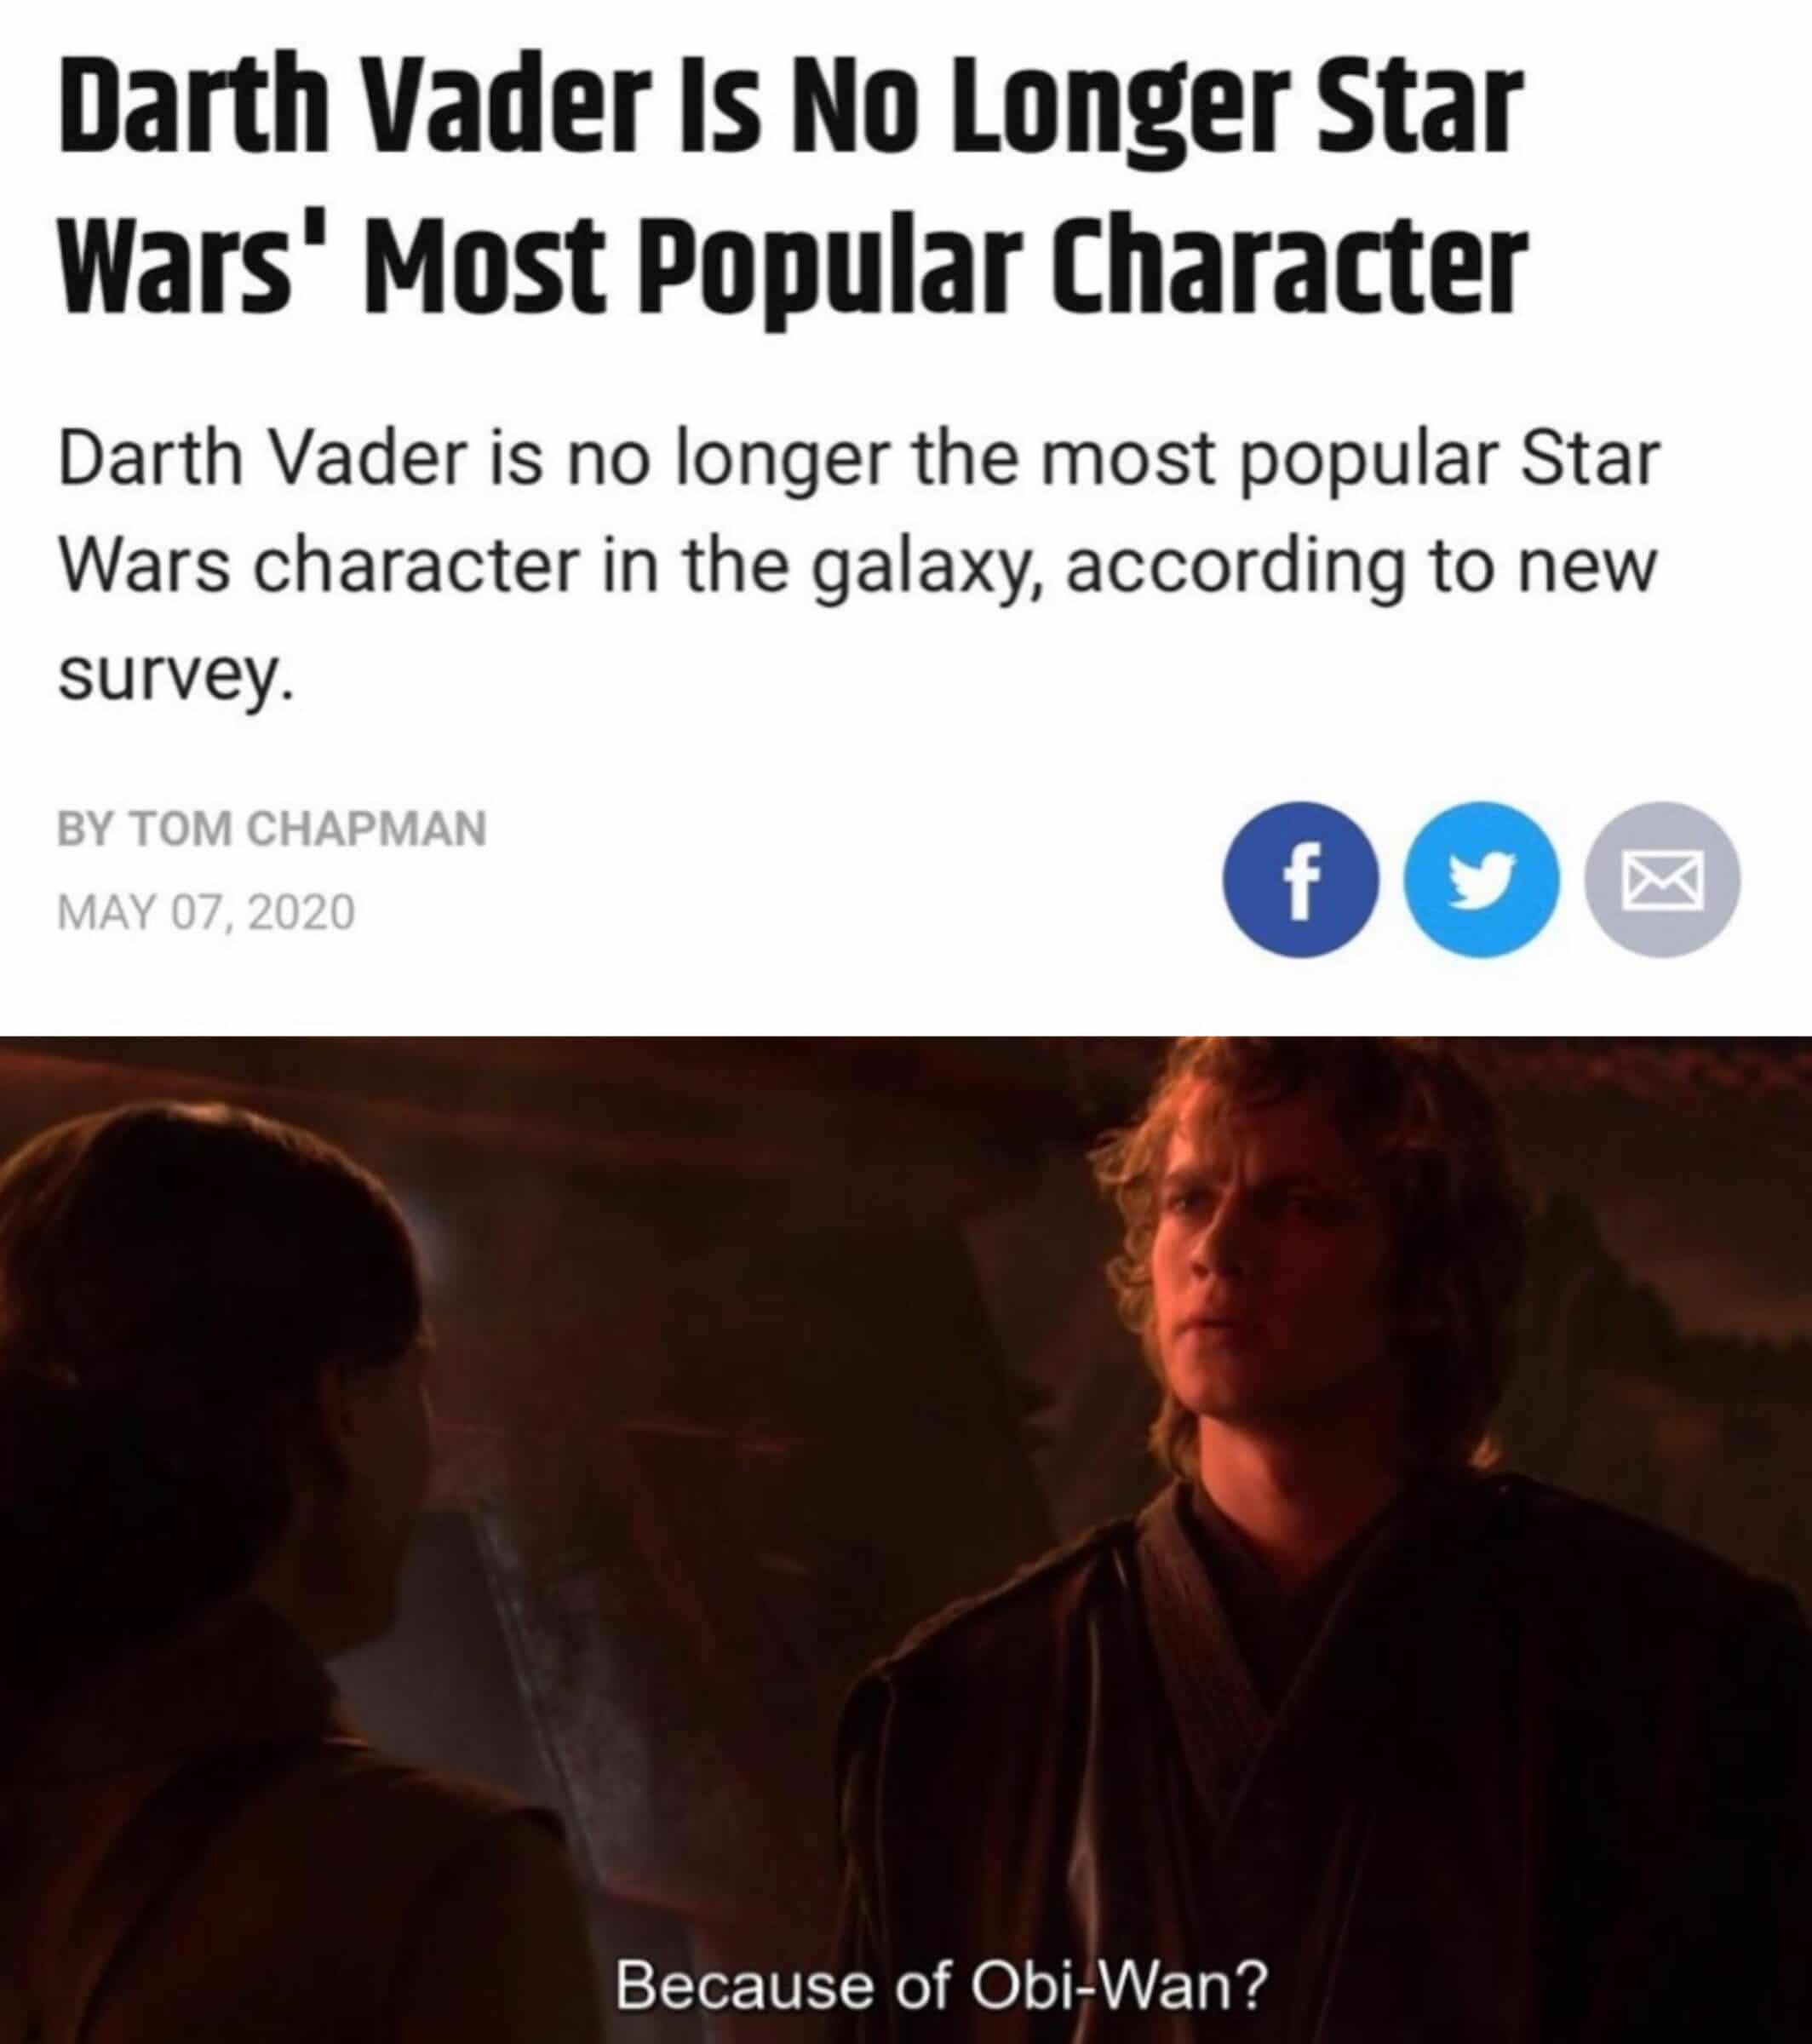 Prequel-memes, Yoda, Vader, Baby Yoda, Star Wars, Darth Vader Star Wars Memes Prequel-memes, Yoda, Vader, Baby Yoda, Star Wars, Darth Vader text: Darth Vader Is No Longer star warsl Most Popular character Darth Vader is no longer the most popular Star Wars character in the galaxy, according to new survey. BY TOM CHAPMAN MAY 07, 2020 000 Because of Obi-Wan? 